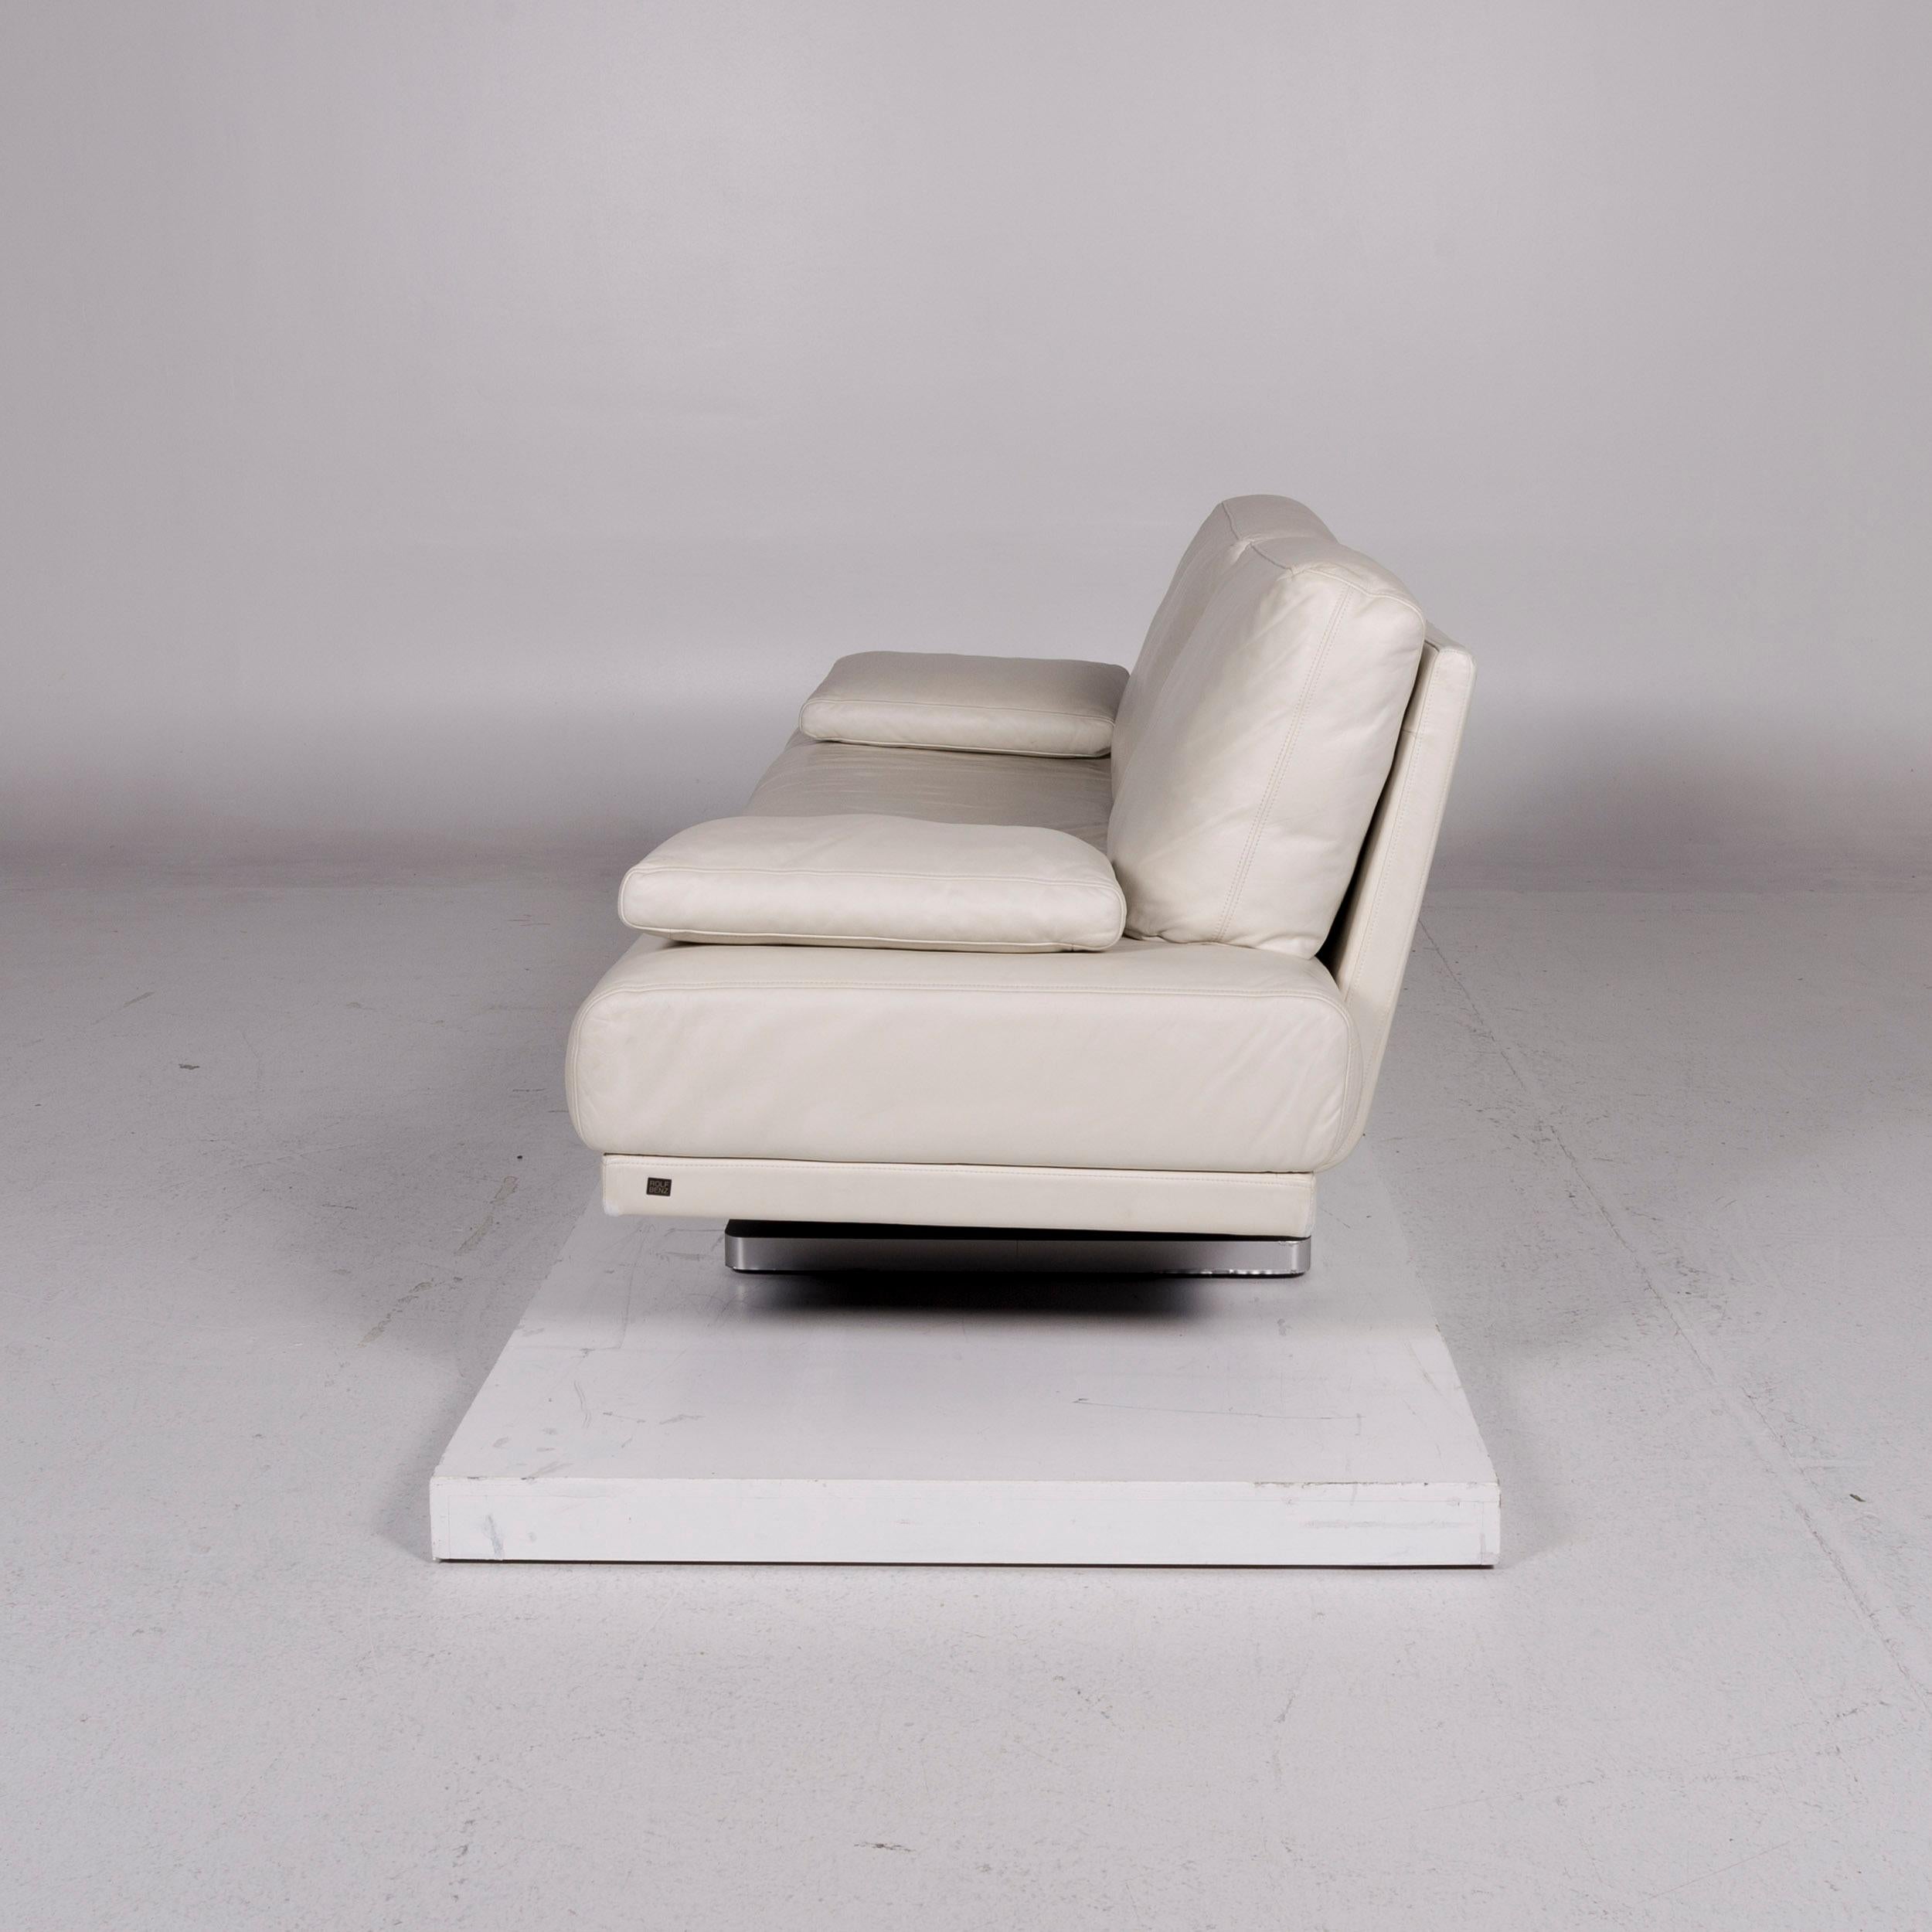 Rolf Benz Rolf Benz 345 Leather Sofa White Two-Seat Couch 1